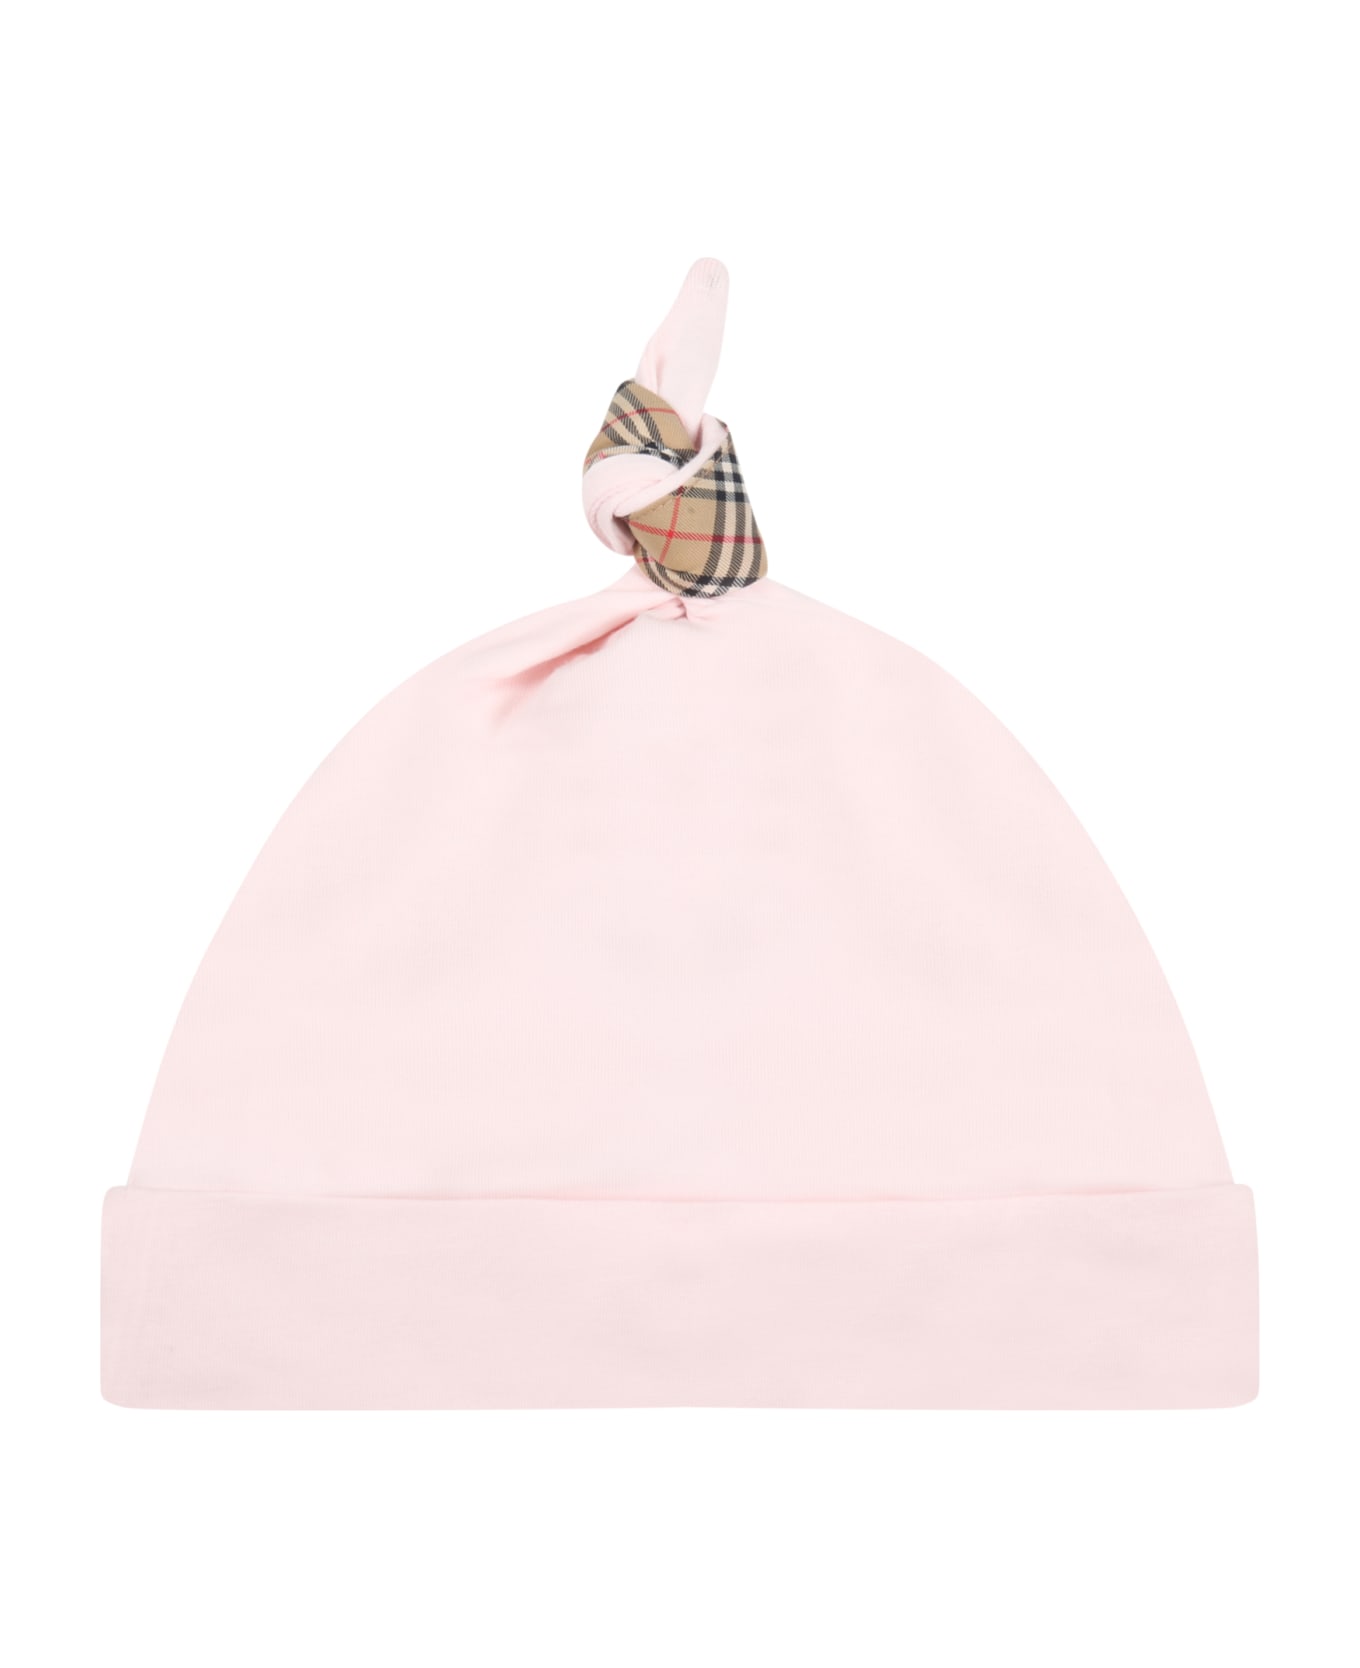 Burberry Pink Set For Baby Girl With Iconic Check Vintage - Pink ボディスーツ＆セットアップ